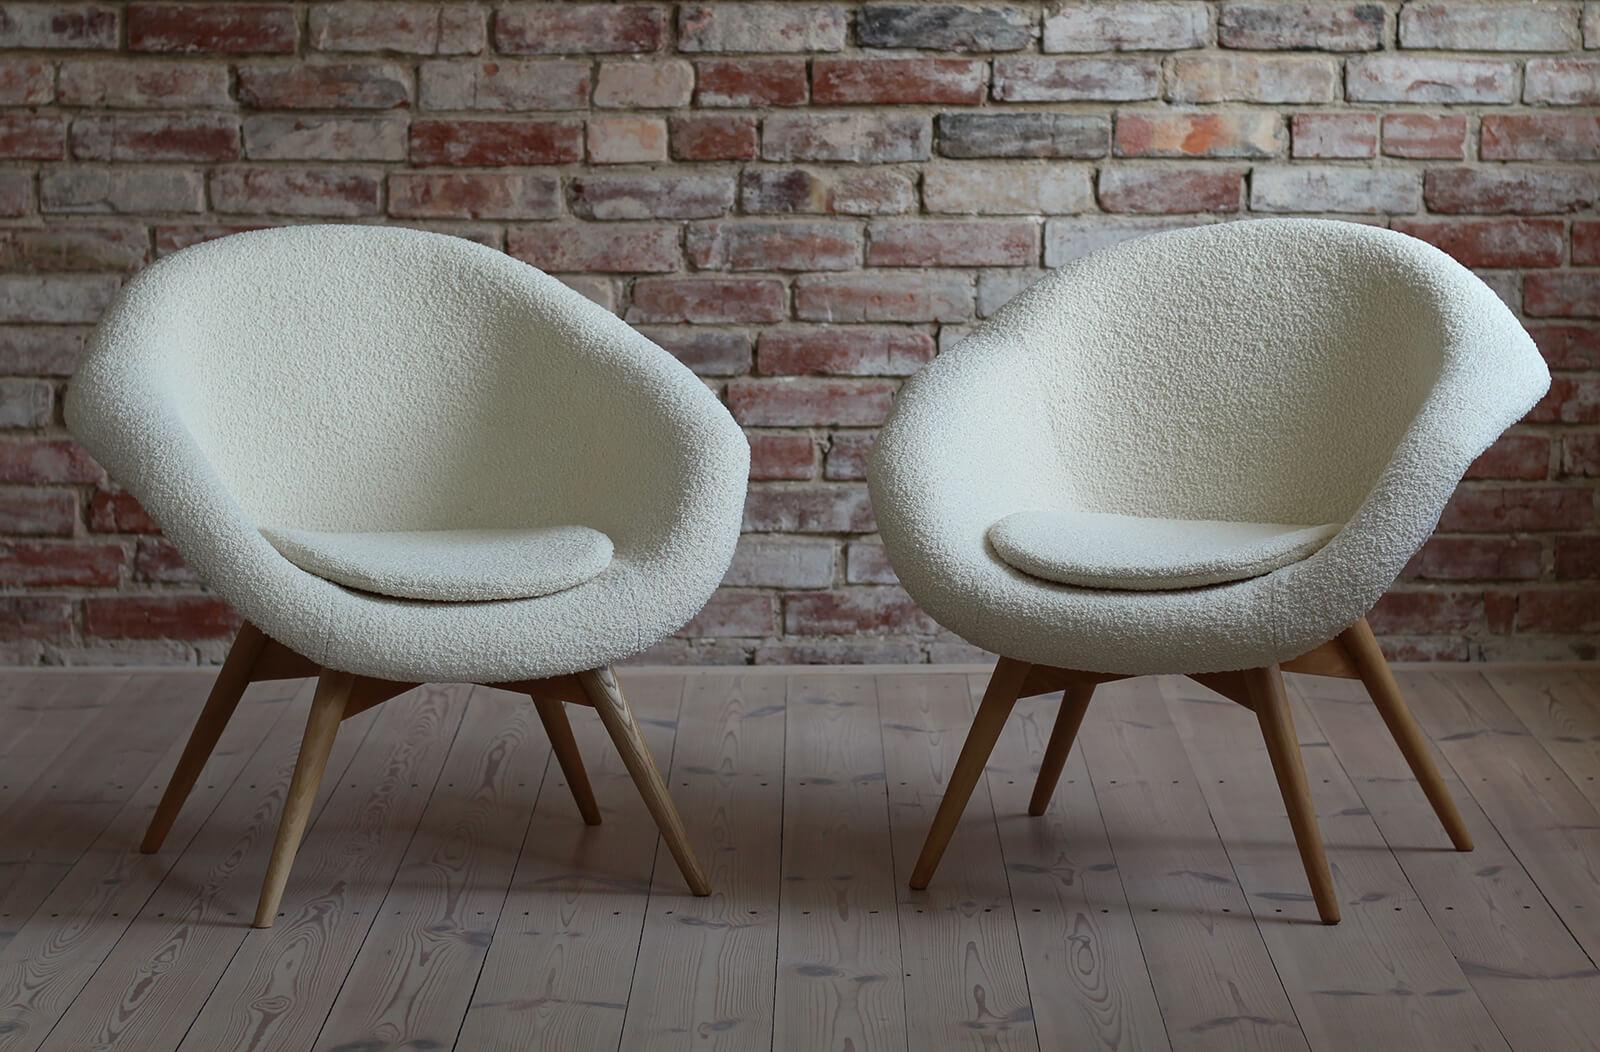 Set of 2 Lounge Chairs Designed by Miroslav Navrátil, 1950s, Czech Republic In Good Condition For Sale In Wrocław, Poland